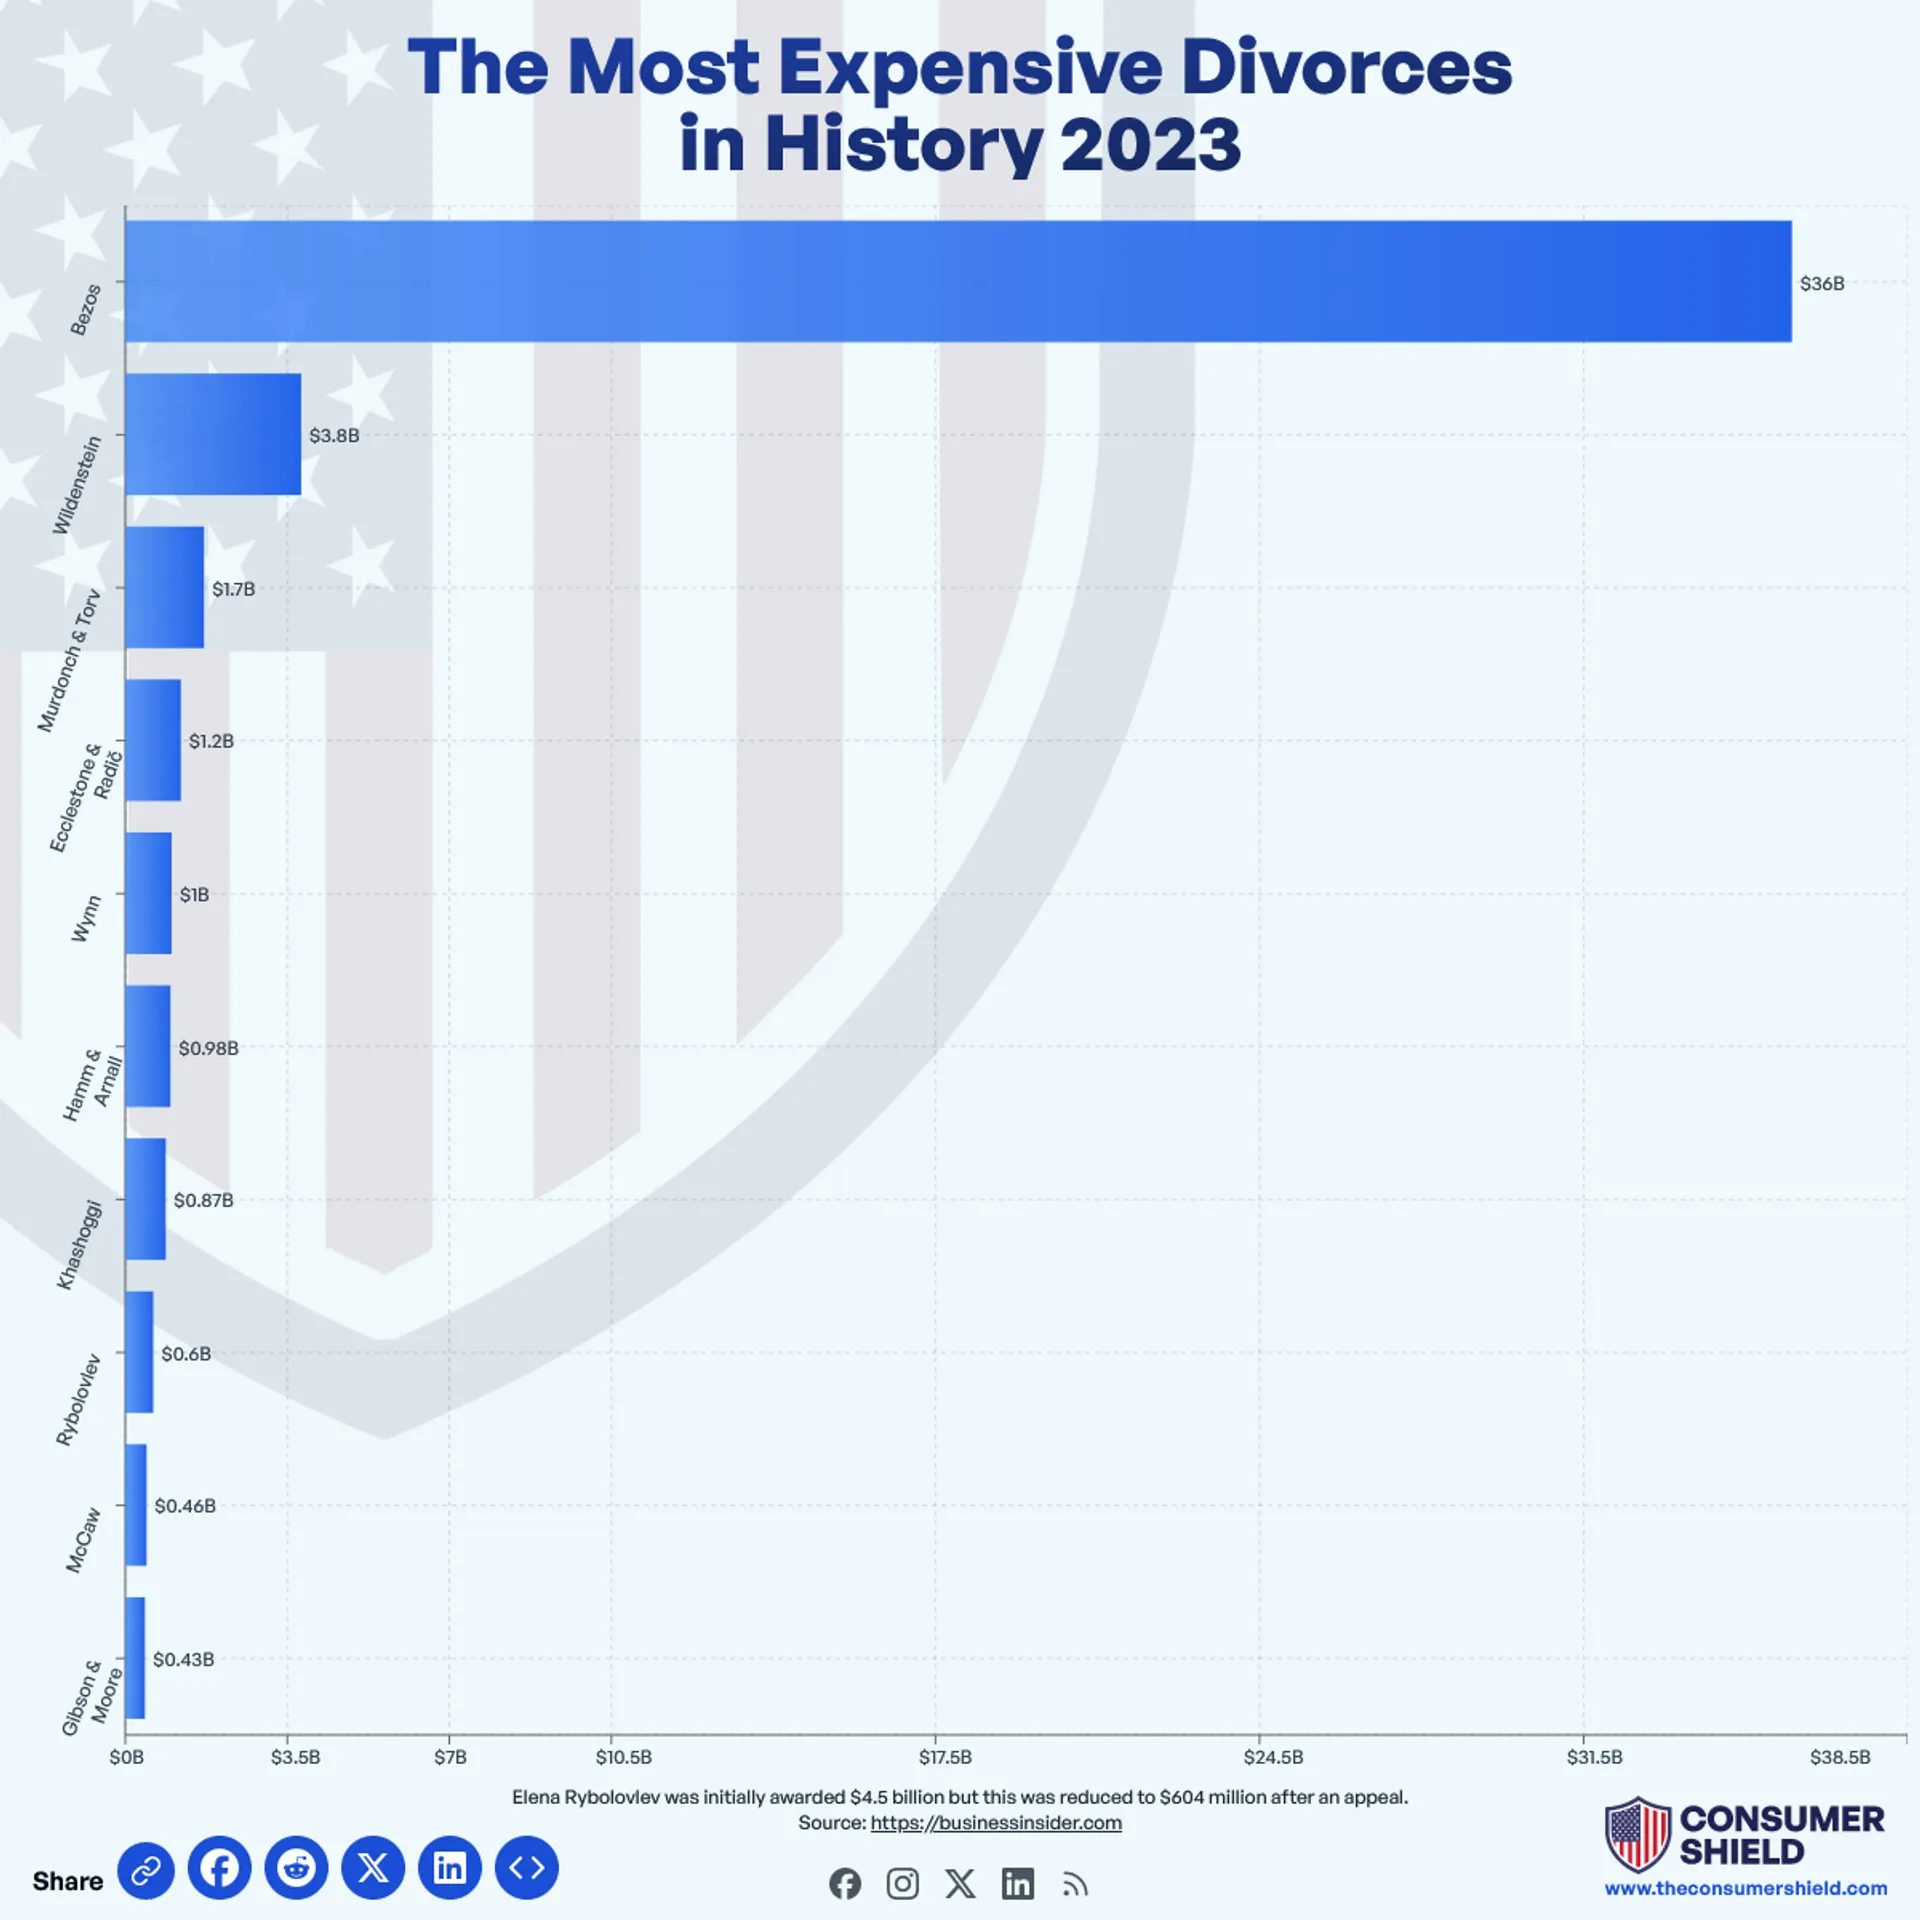 The Most Expensive Divorces in History 2023